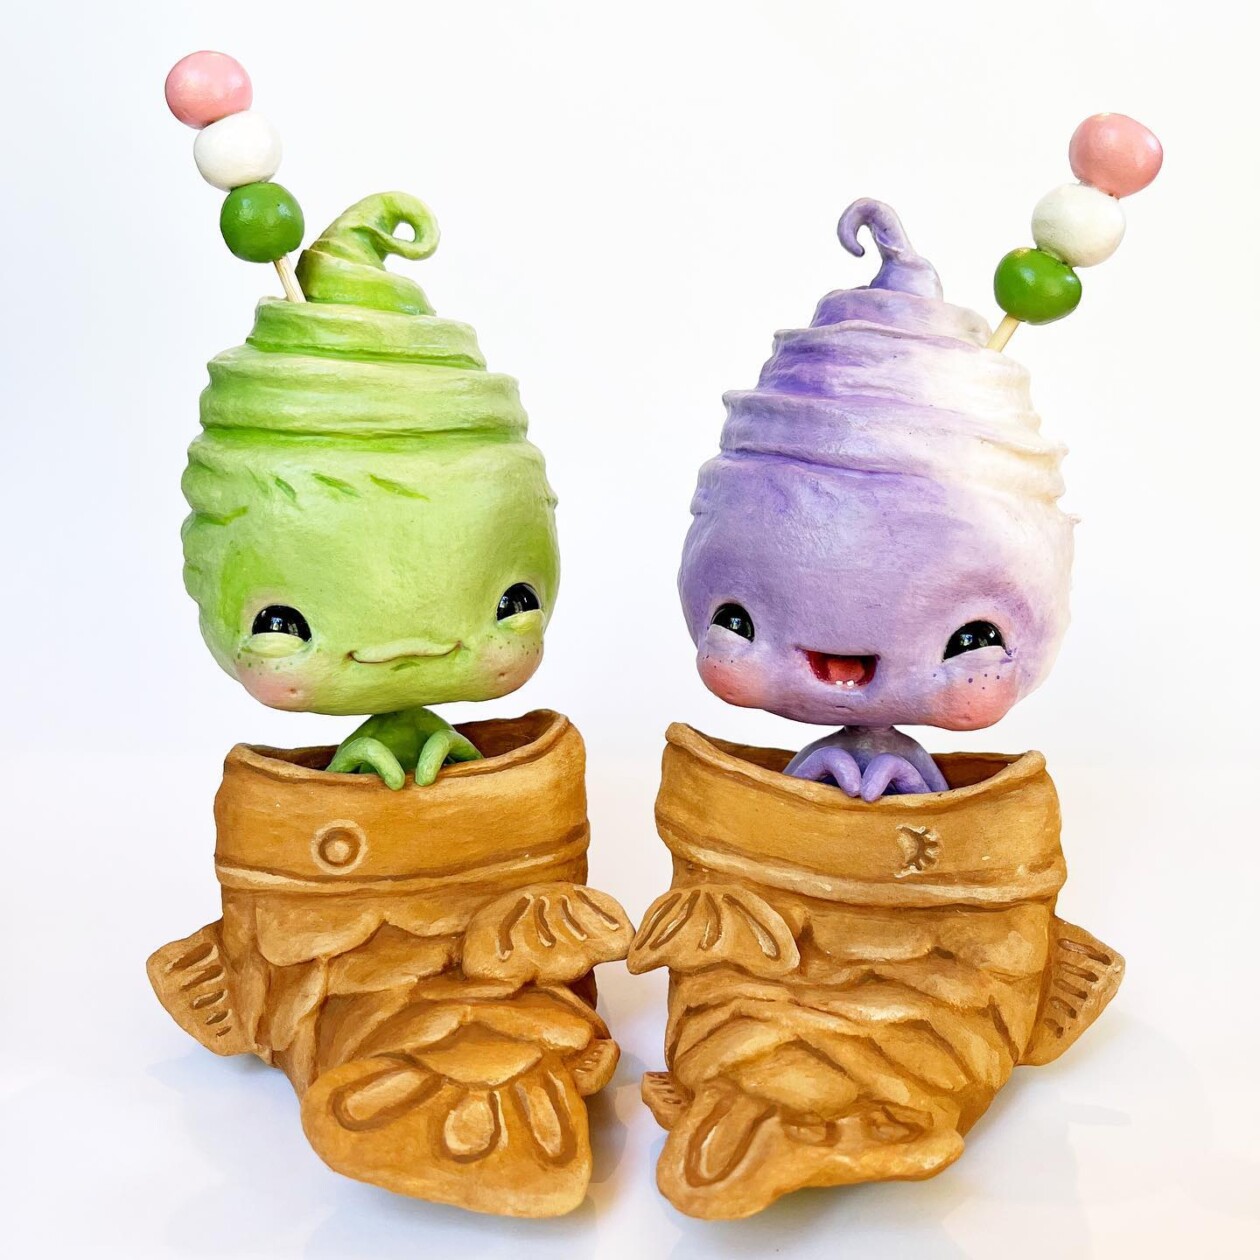 Cute And Creepy Little Monster Toys By Sara Duarte (24)